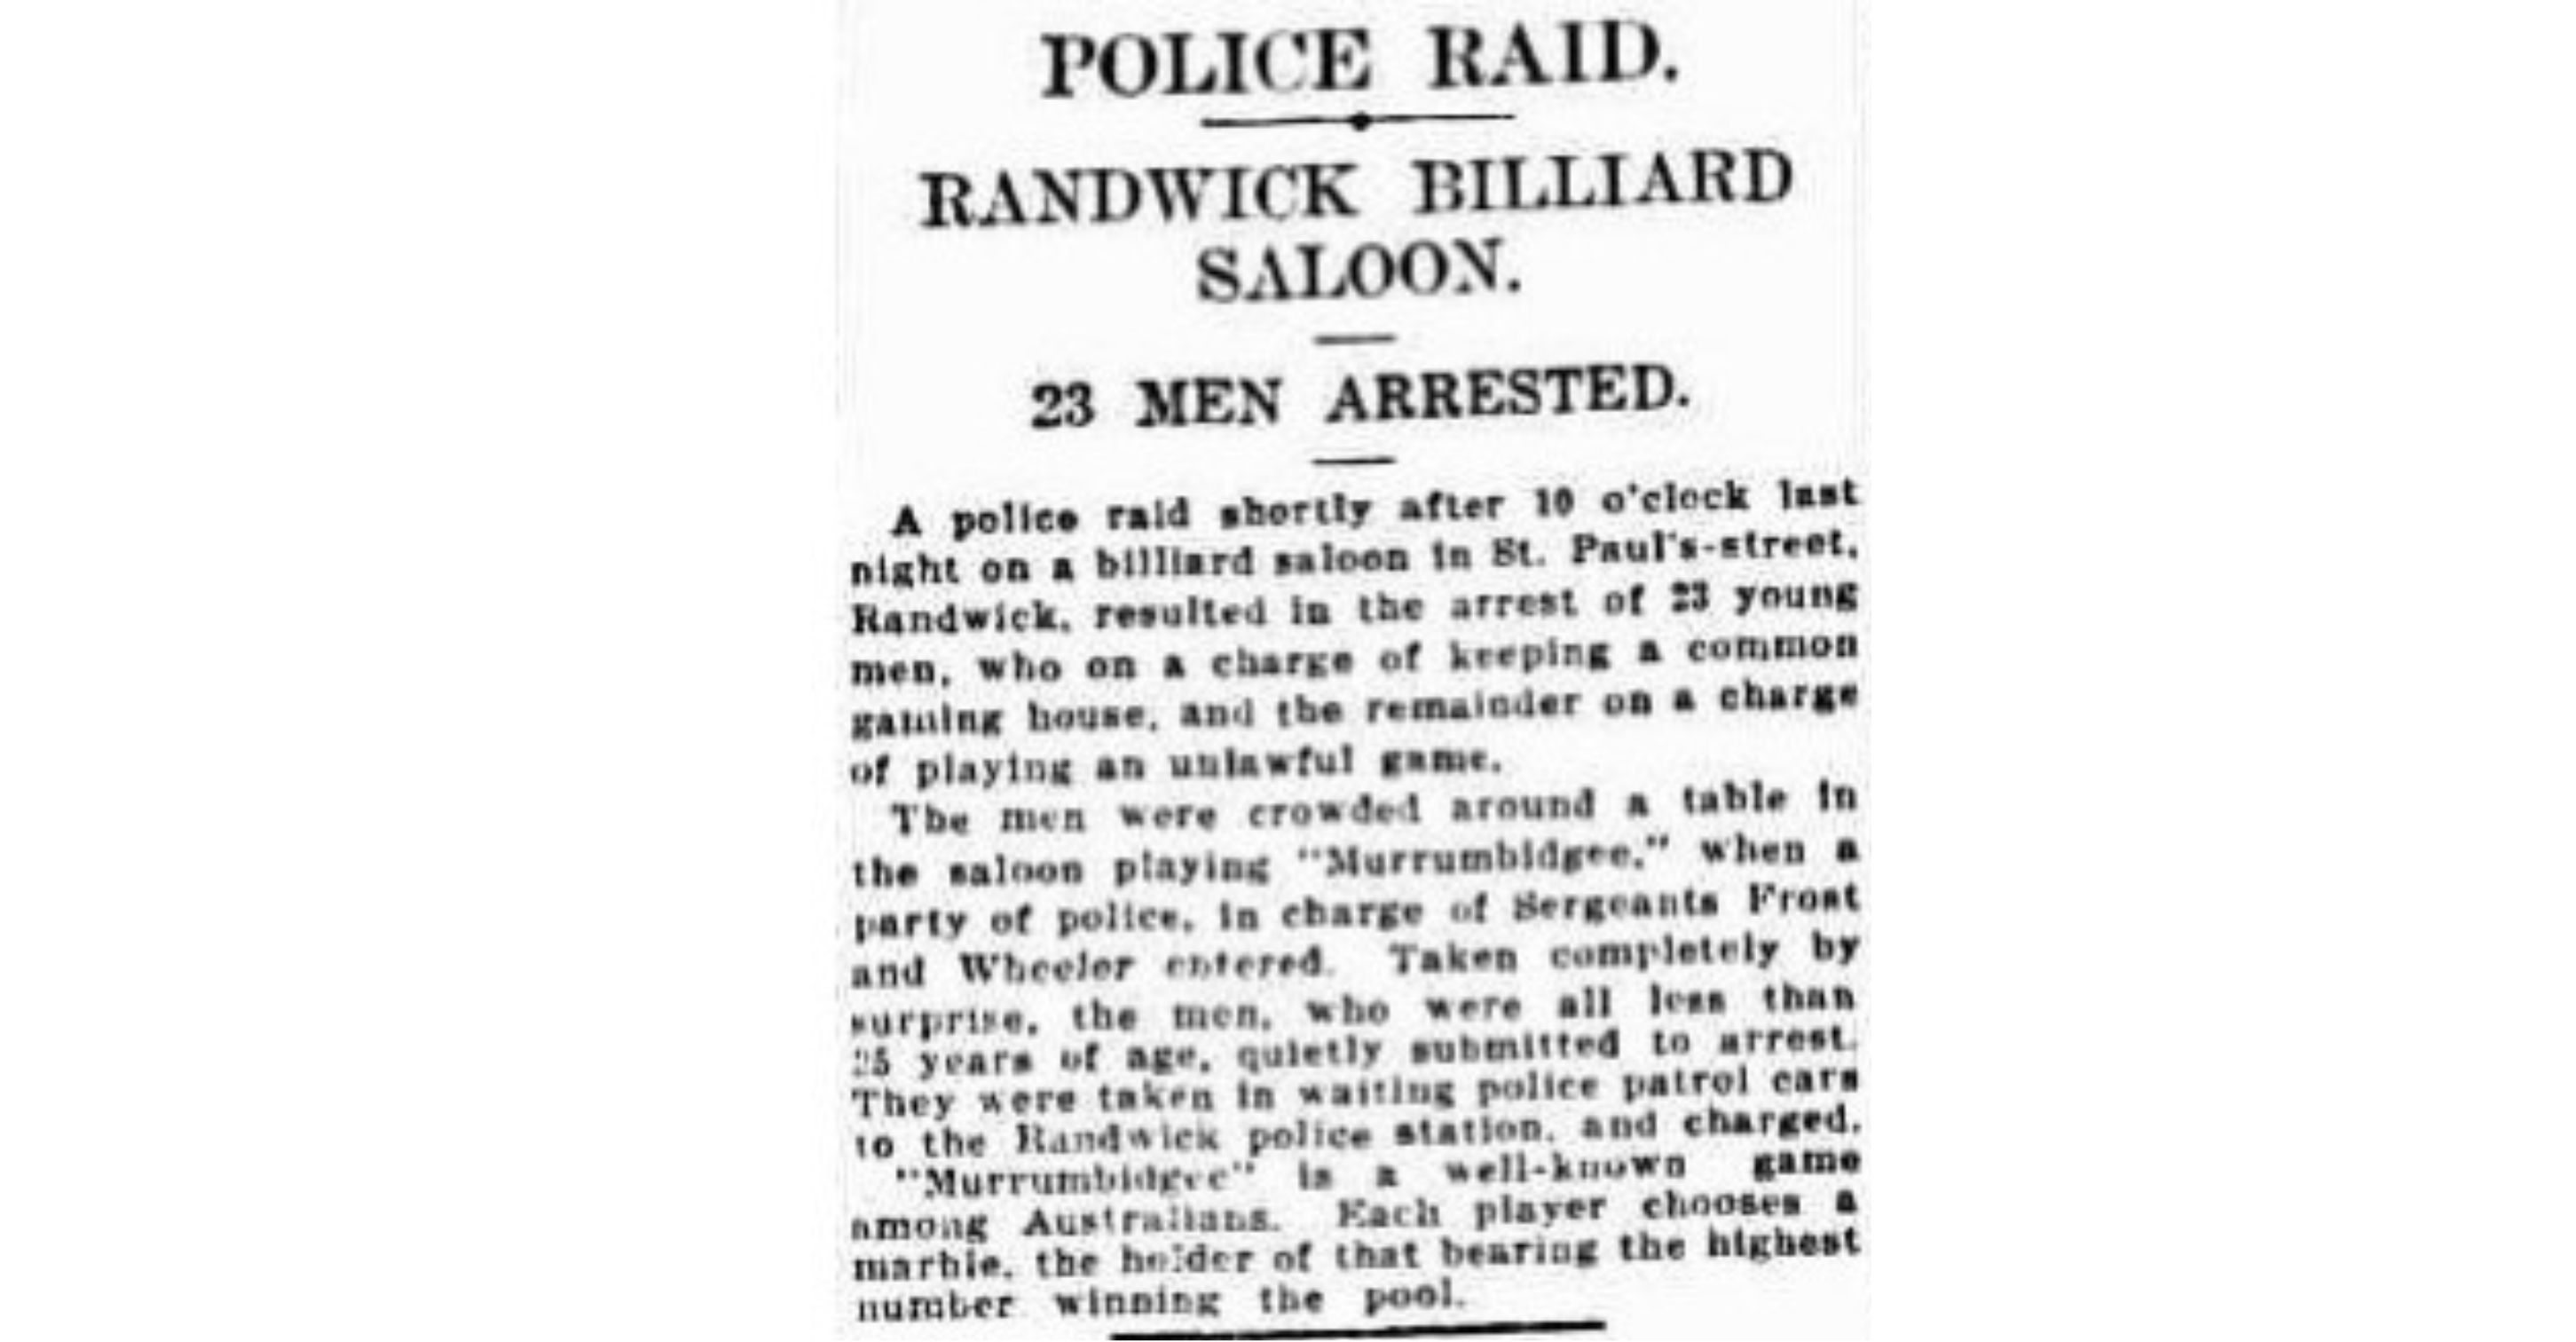 Image of an excerpt from the Sydney Morning Herald in 1928, reporting the arrest of young men for illegal gambling at the billard hall in Randwick.